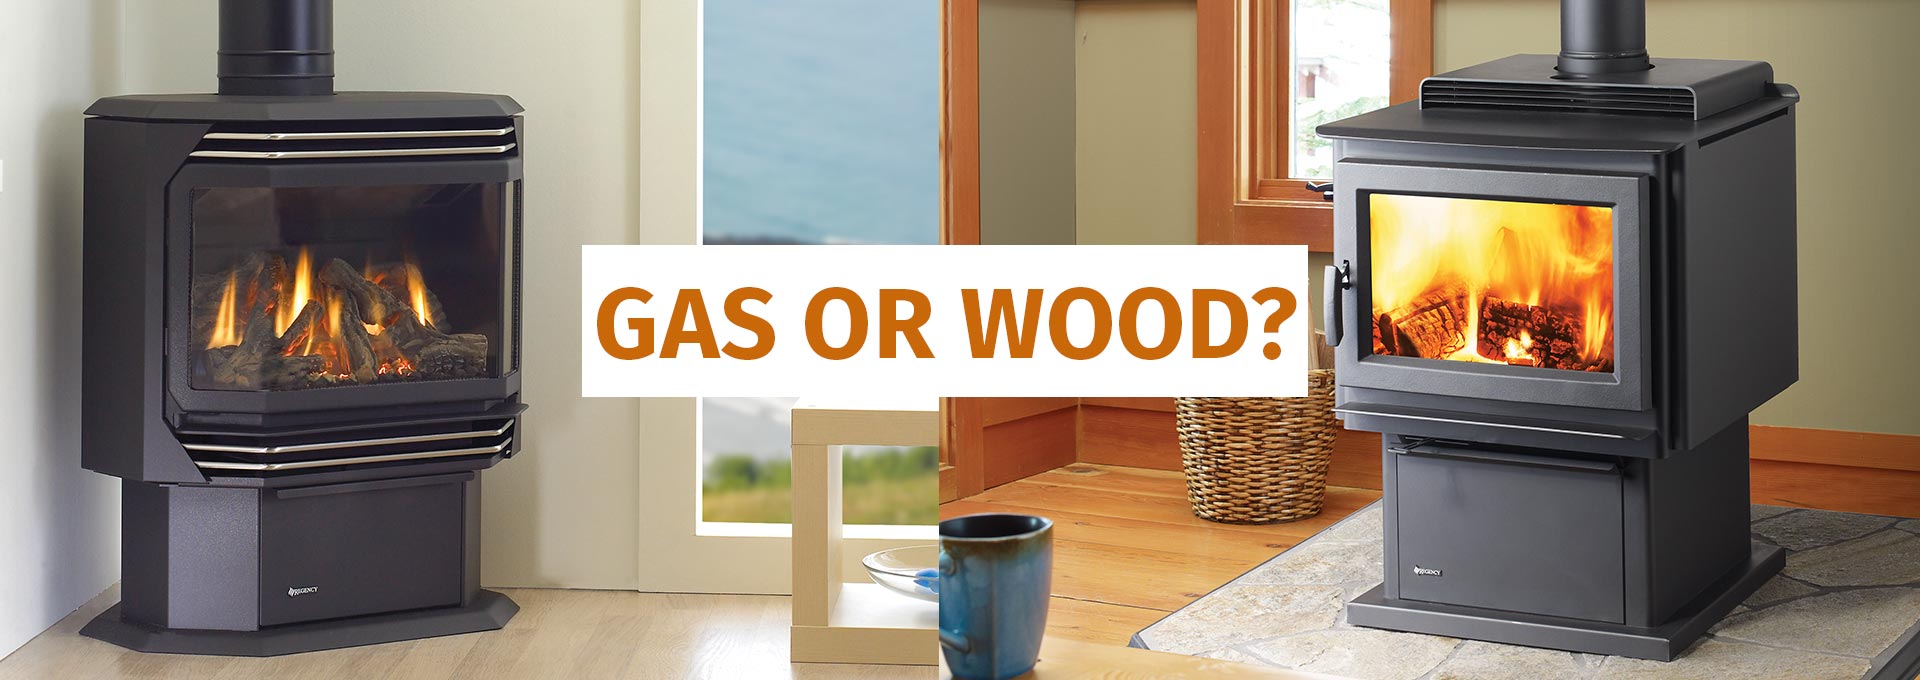 Wood Stove or Gas Stove – How to Choose? 